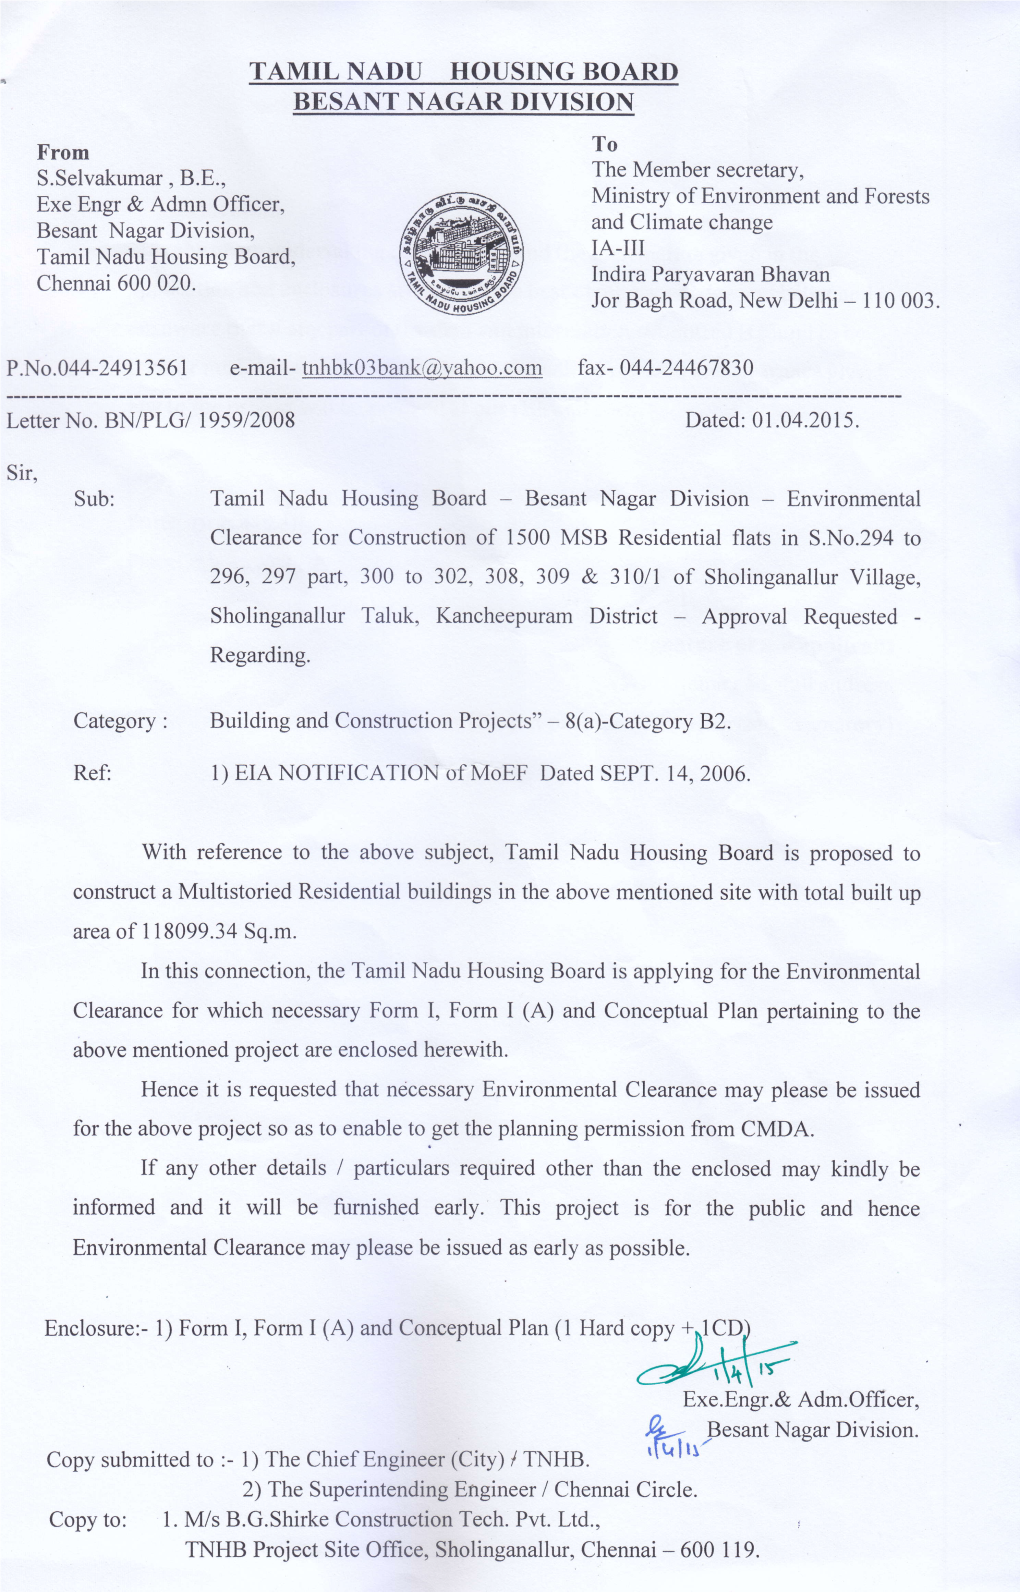 Copy Submitted to :- 1) the Chief Engineer (City) / TNHB Fut""T'ut 2) the Superintending Engineer / Chennai Circle